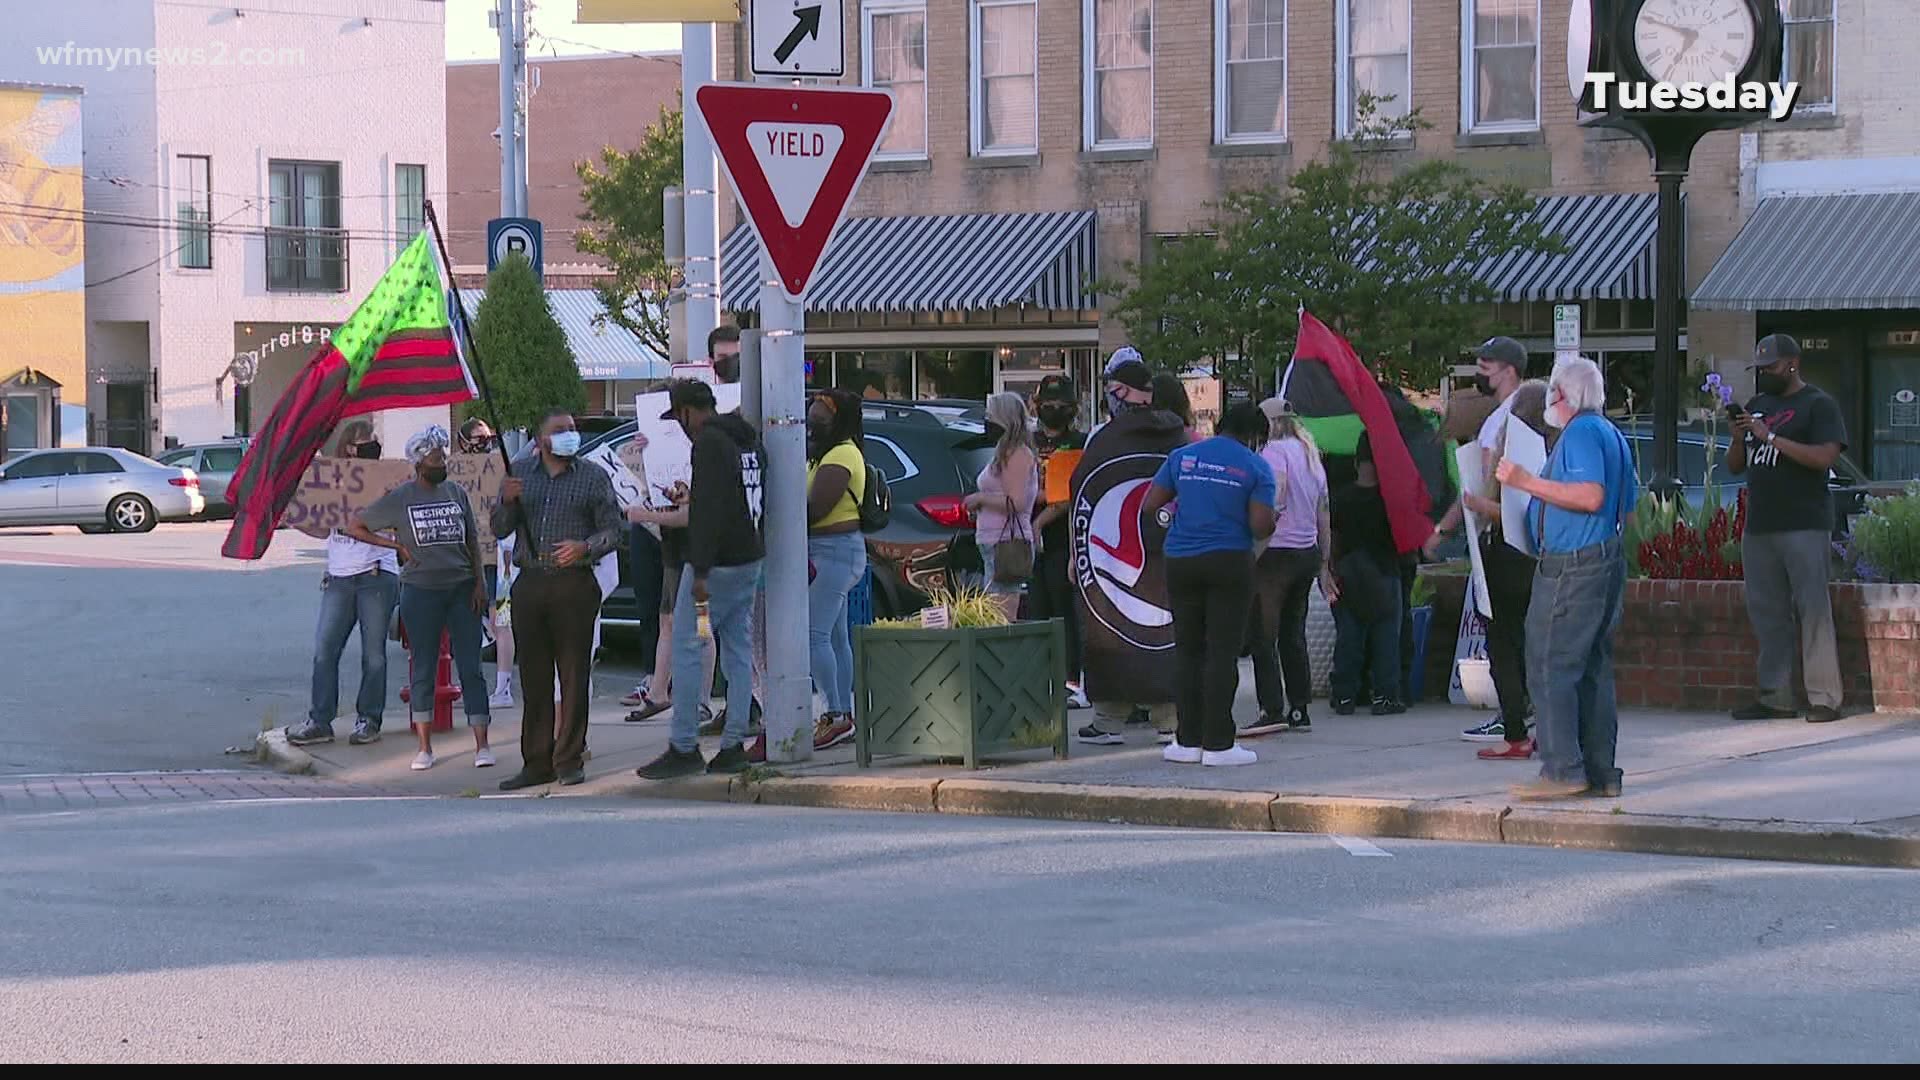 Groups of demonstrators have shown up in downtown Graham all week. At least one business complained.